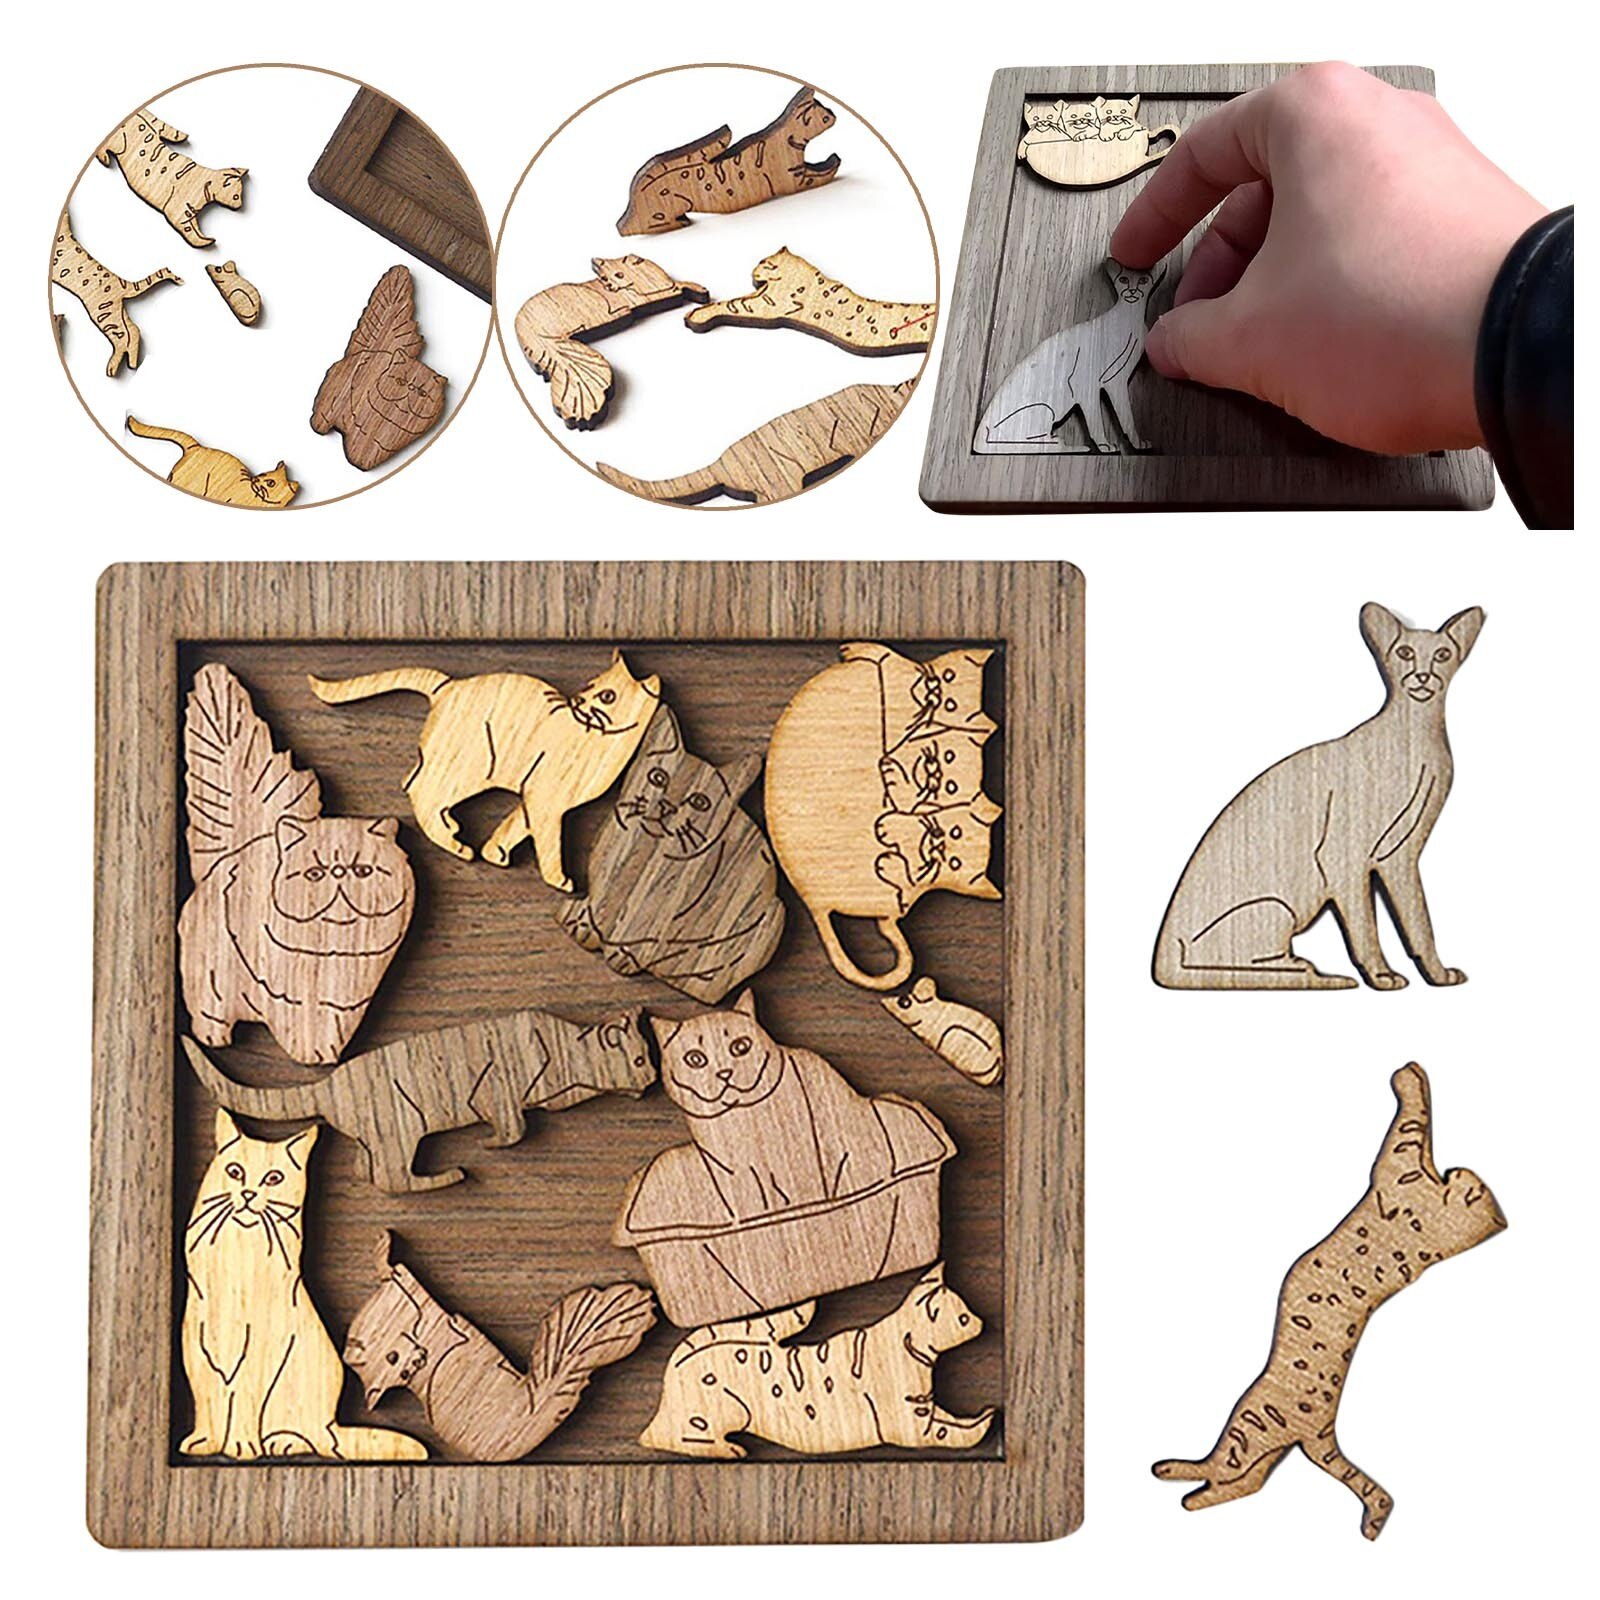 Barf Toy Of Mind-broadening Animal Puzzles Children The Wooden Give Ability Puzzle Toy Blank Craft